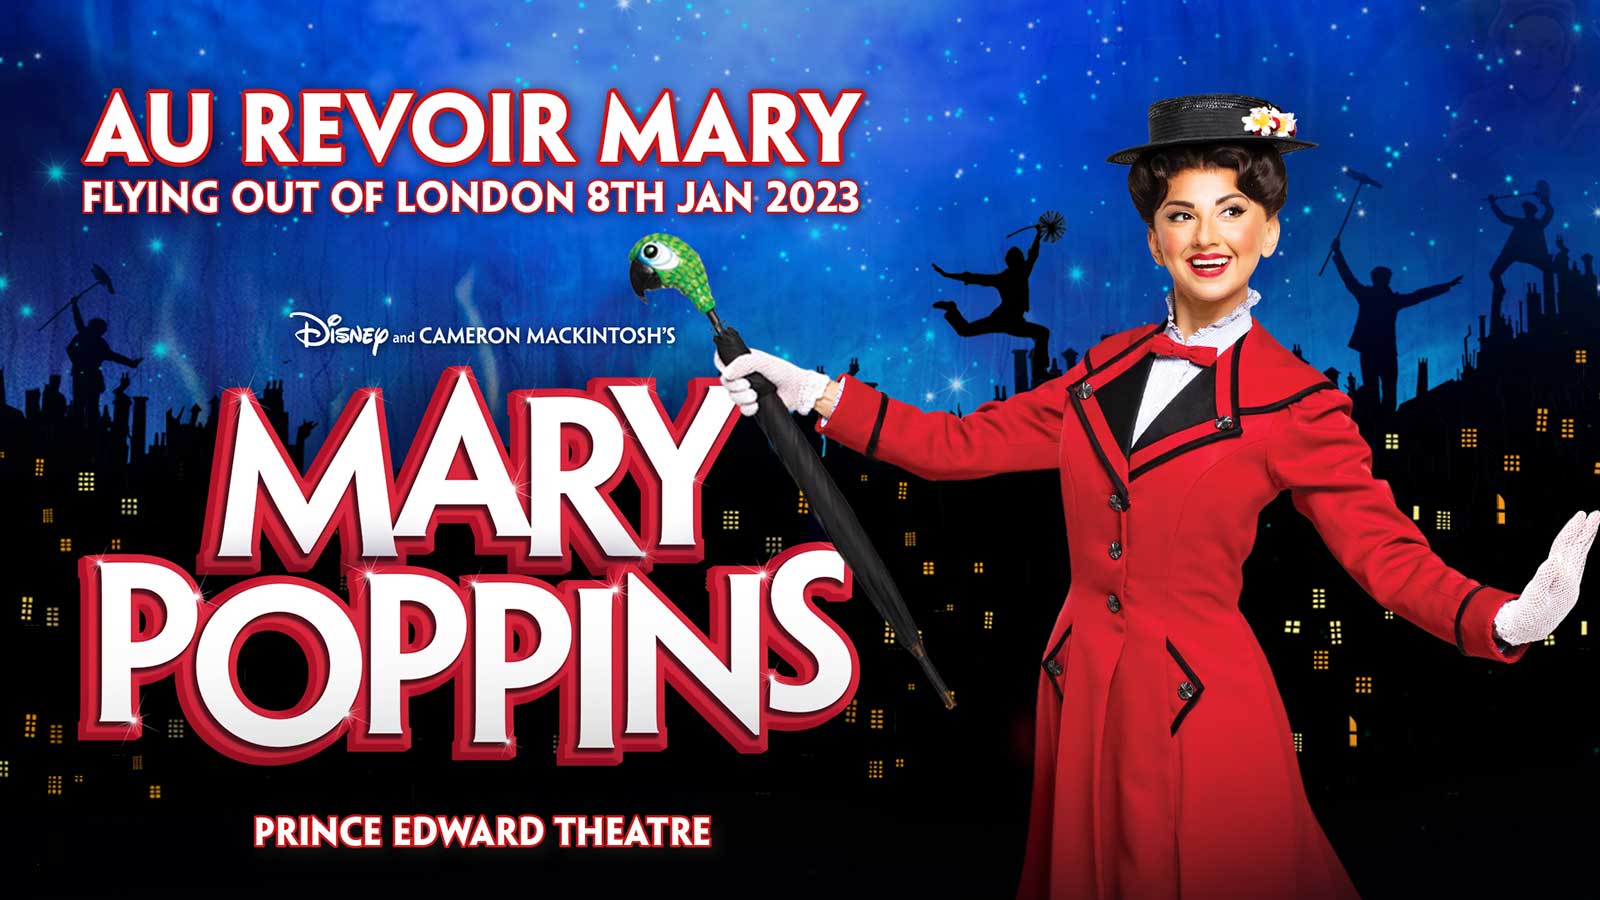 Mary Poppins Broadway Poster Wallpapers